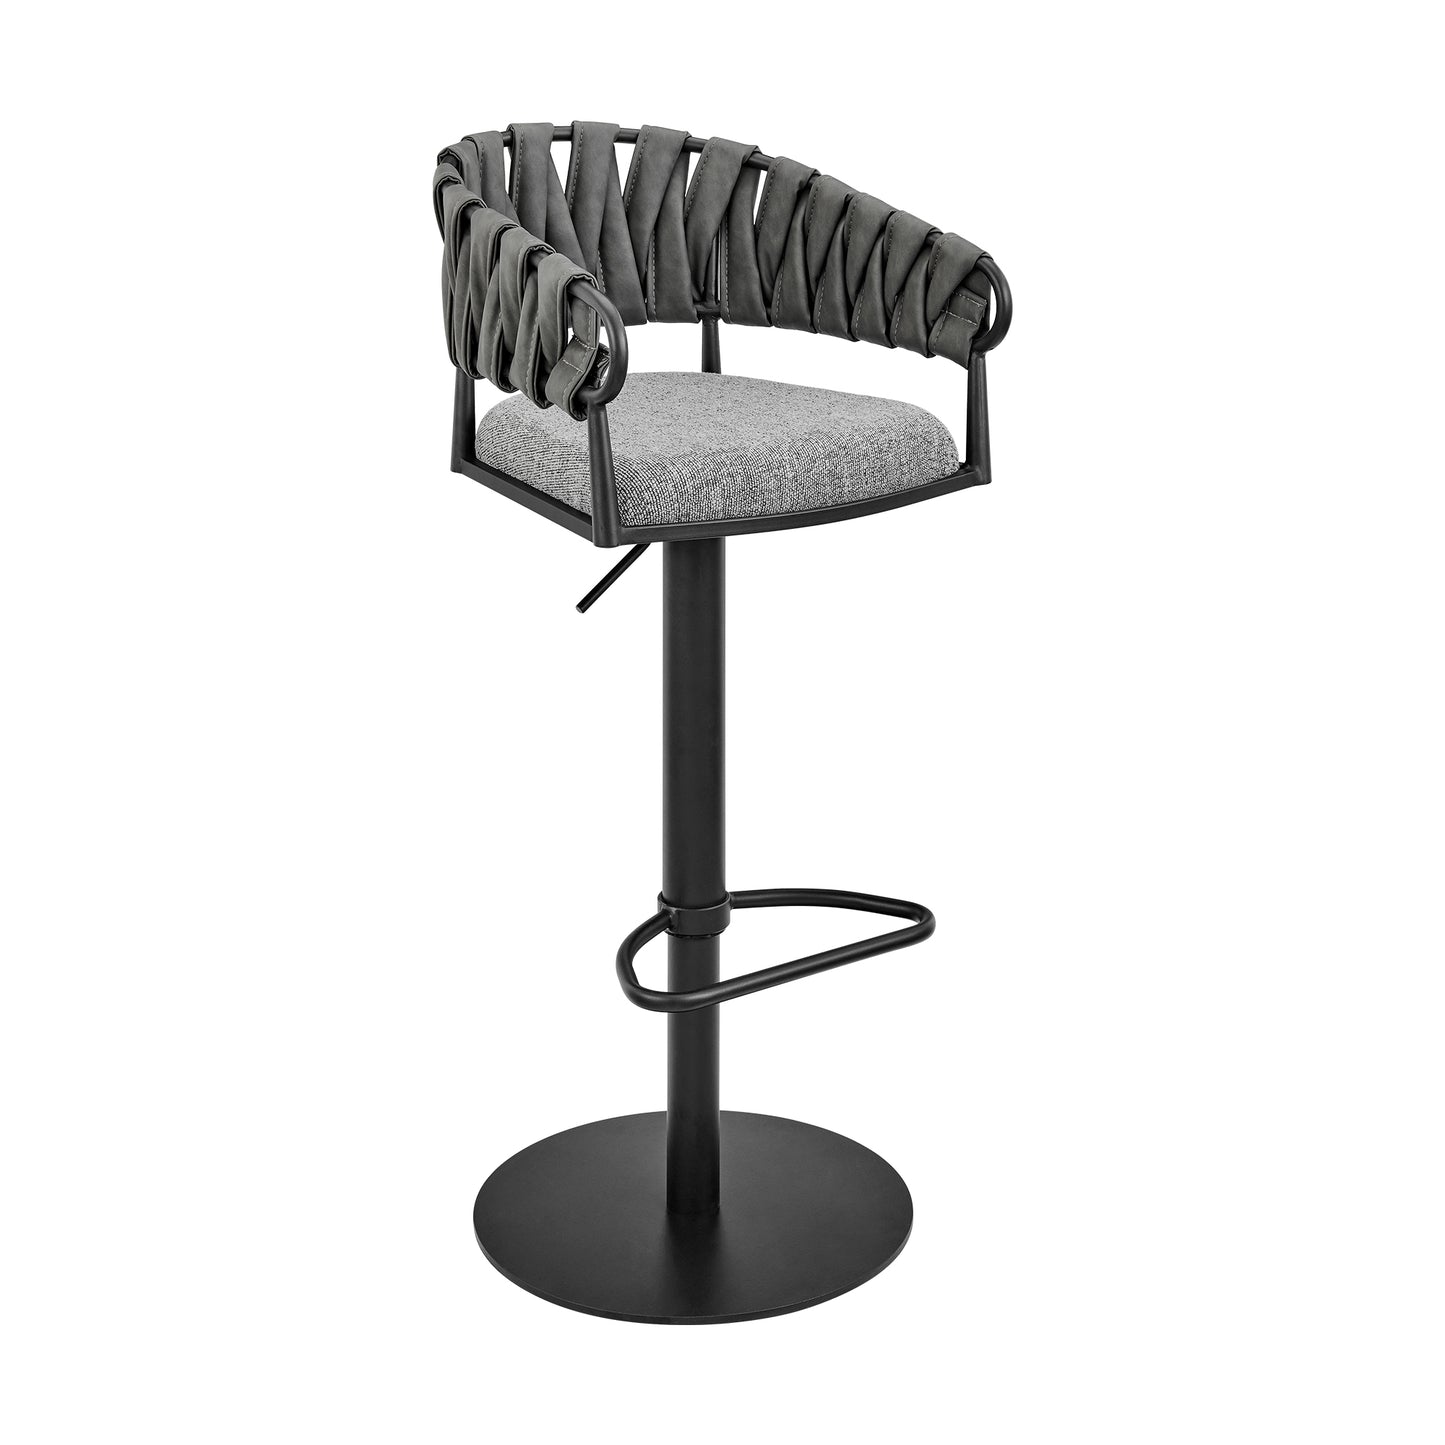 Blaise Adjustable Swivel Counter or Bar Stool in Black Metal with Gray Fabric and Faux Leather